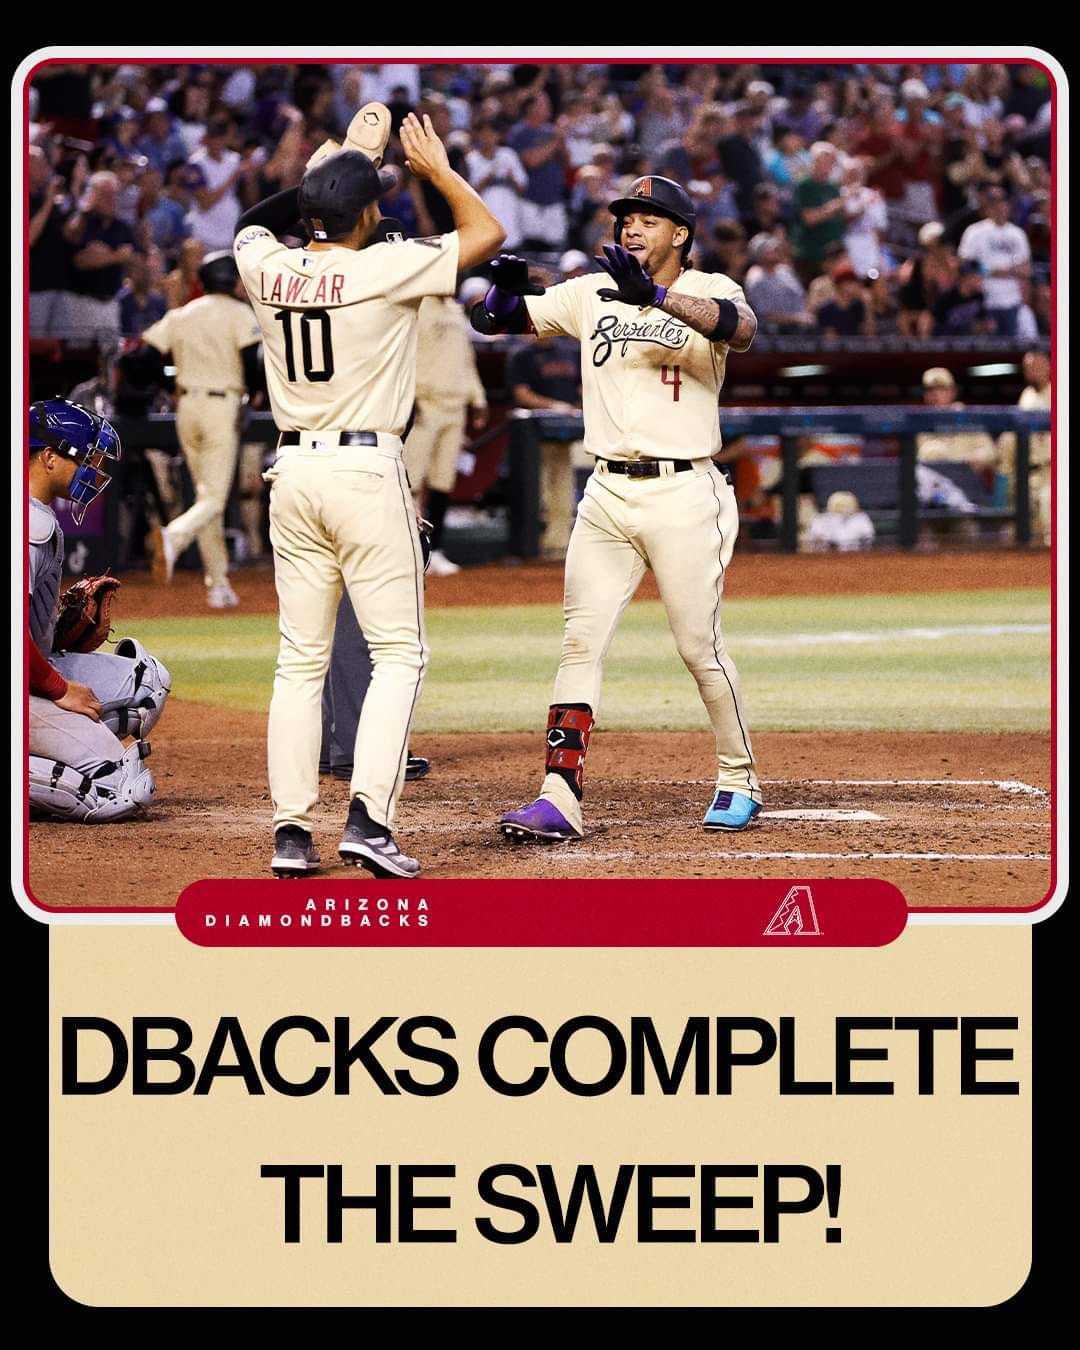 Diamondbacks Sweep Serpientes and Secure 2nd Wild Card Spot with